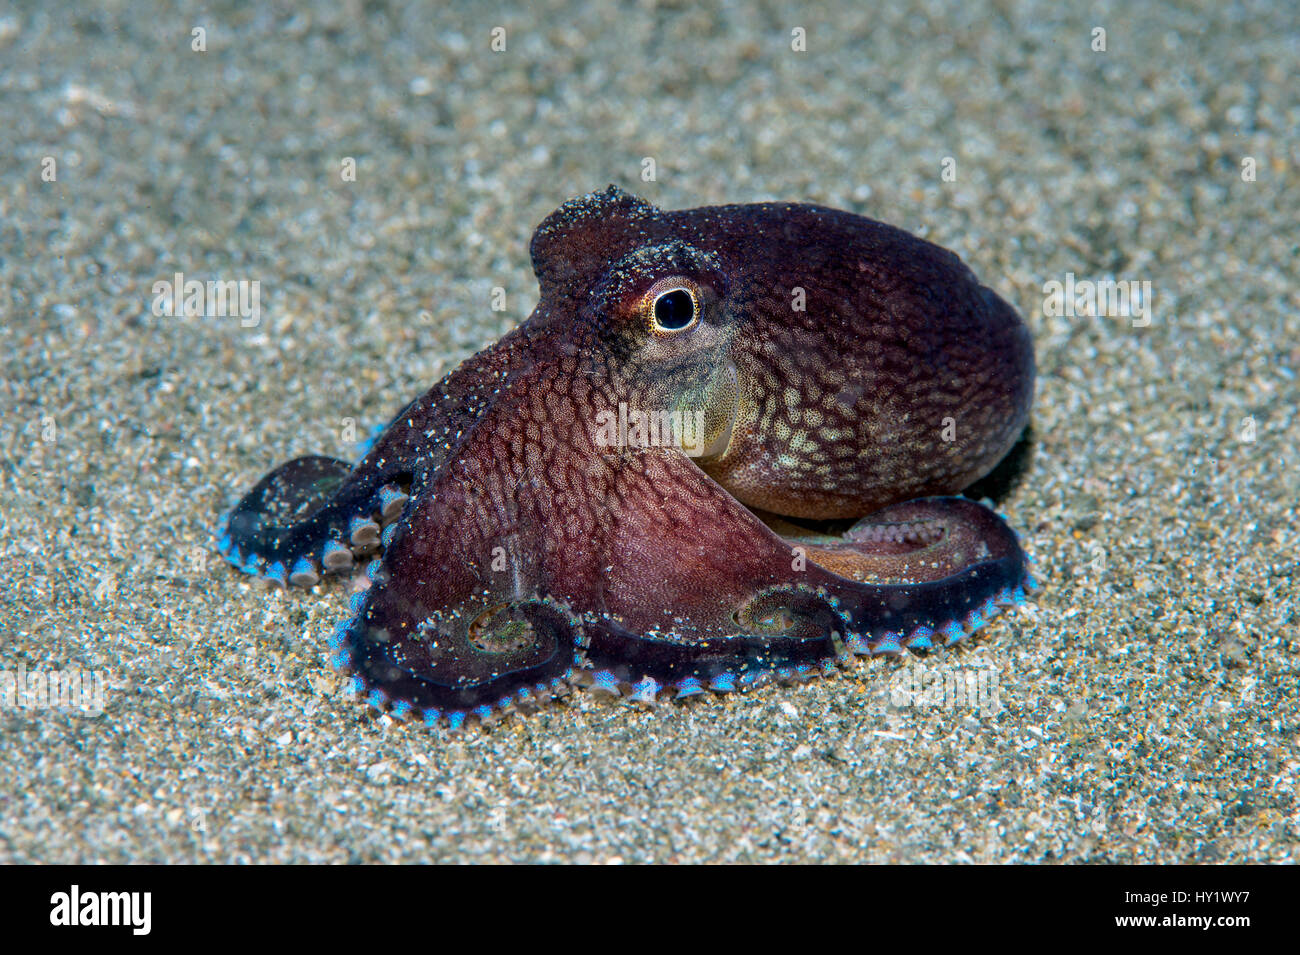 Veined octopus (Amphioctopus marginatus) spreading its arms as it explores the seabed at night. Anilao, Batangas, Luzon, Philippines. Verde Island Passages, Tropical West Pacific Ocean. Stock Photo